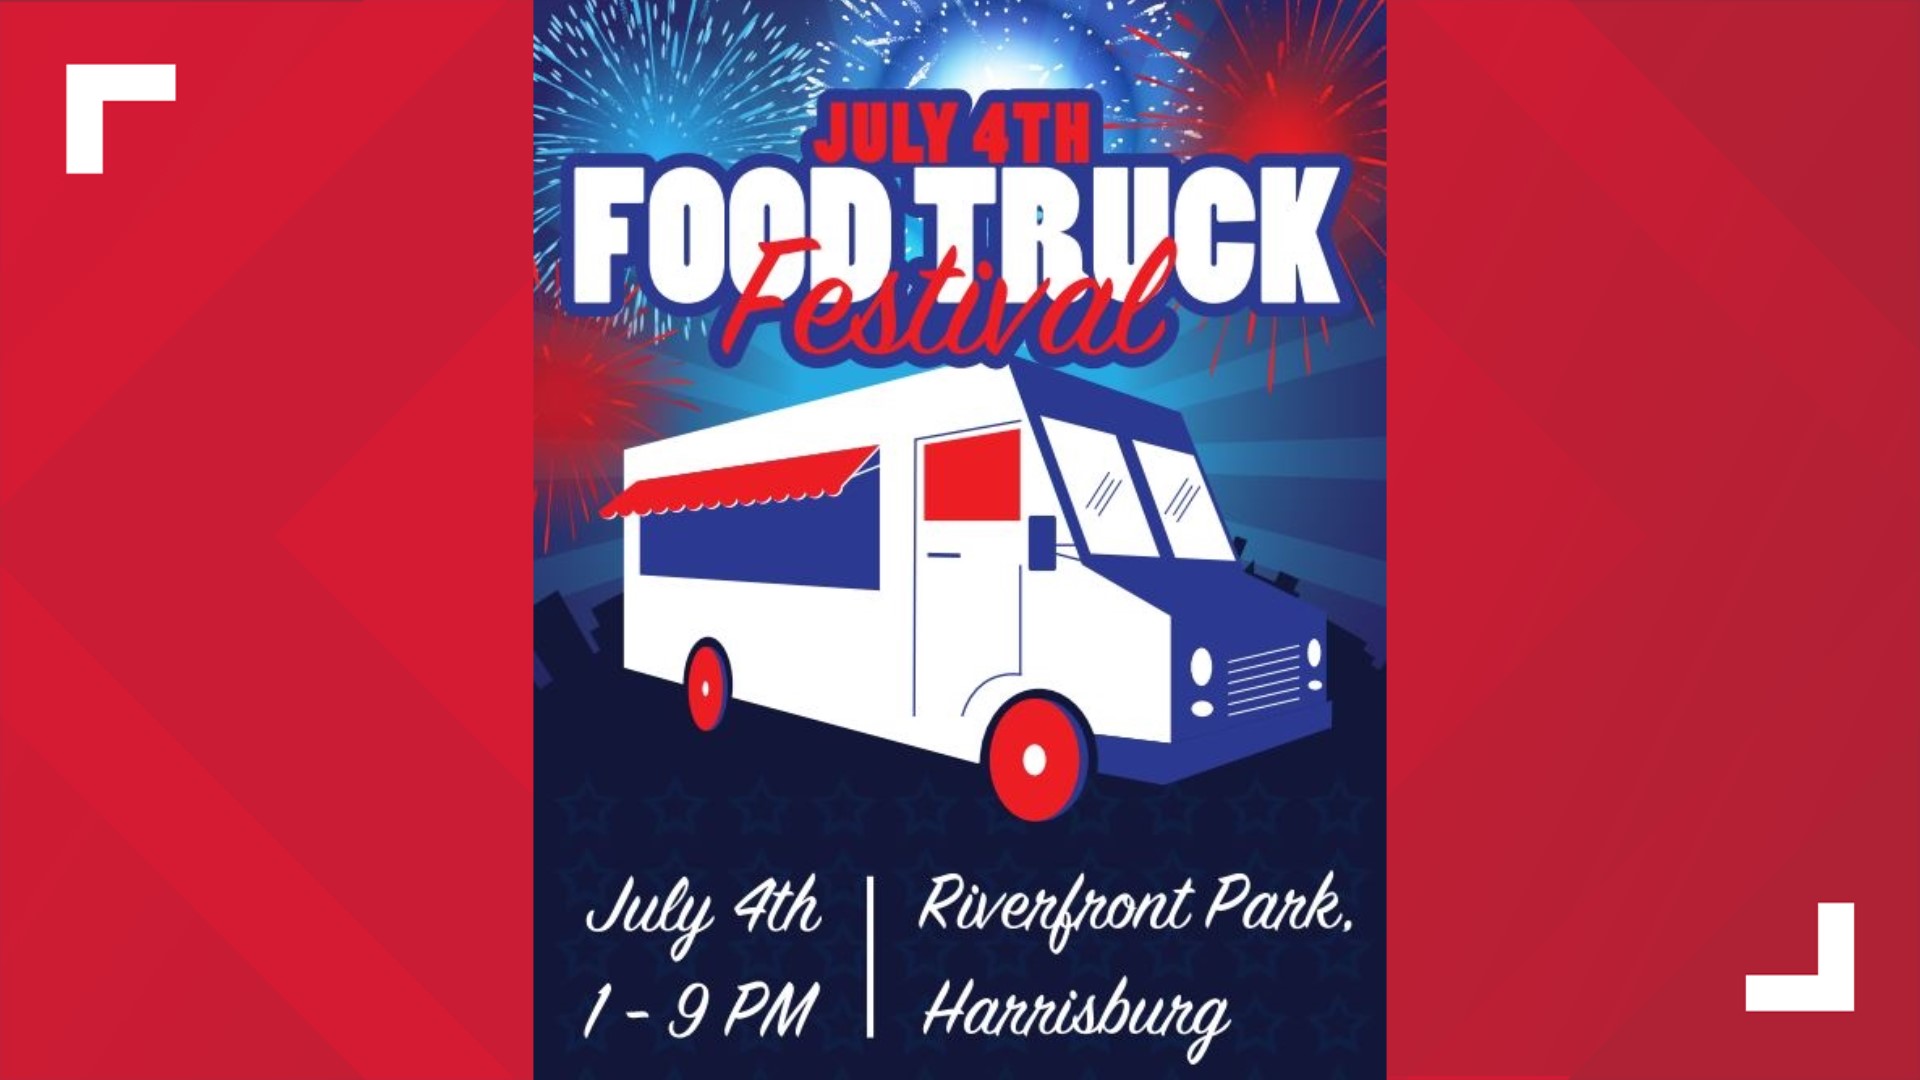 Harrisburg officials release additional details on July 4th Food Truck